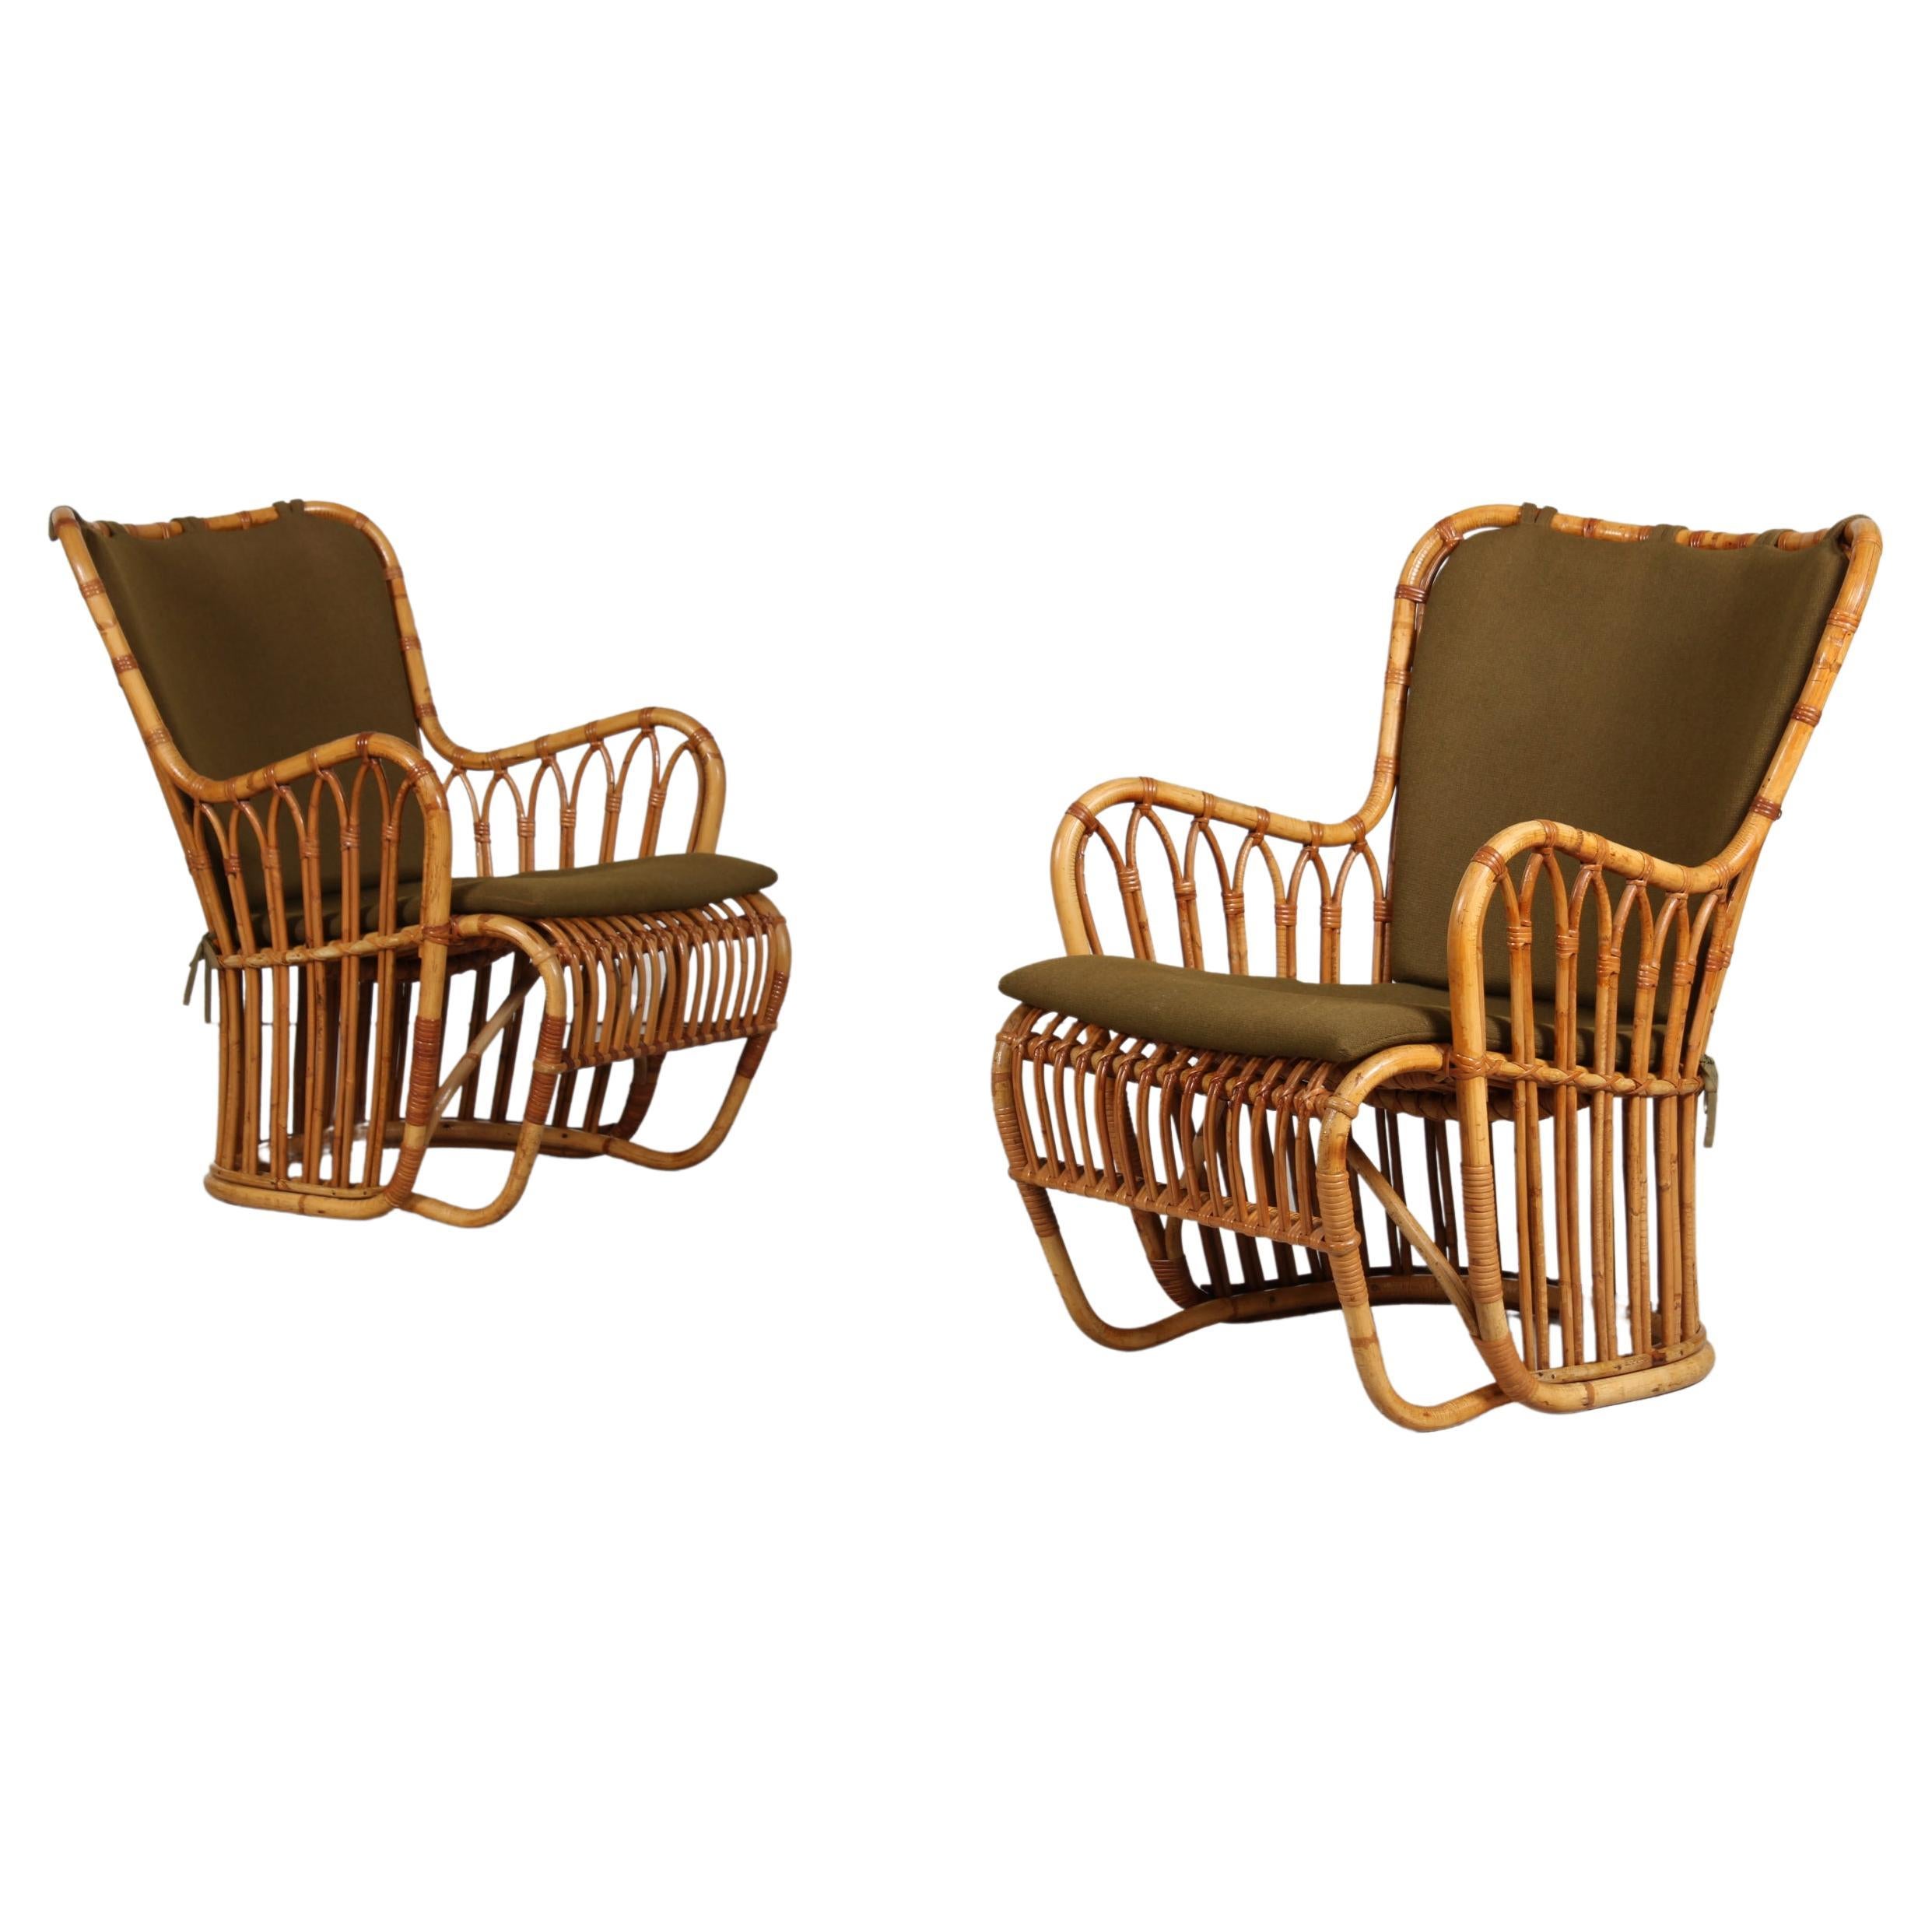 Tove Kindt-Larsen Pair R. Wengler Bamboo Lounge Chairs Denmark Launched 1937 In Good Condition For Sale In Aarhus C, DK